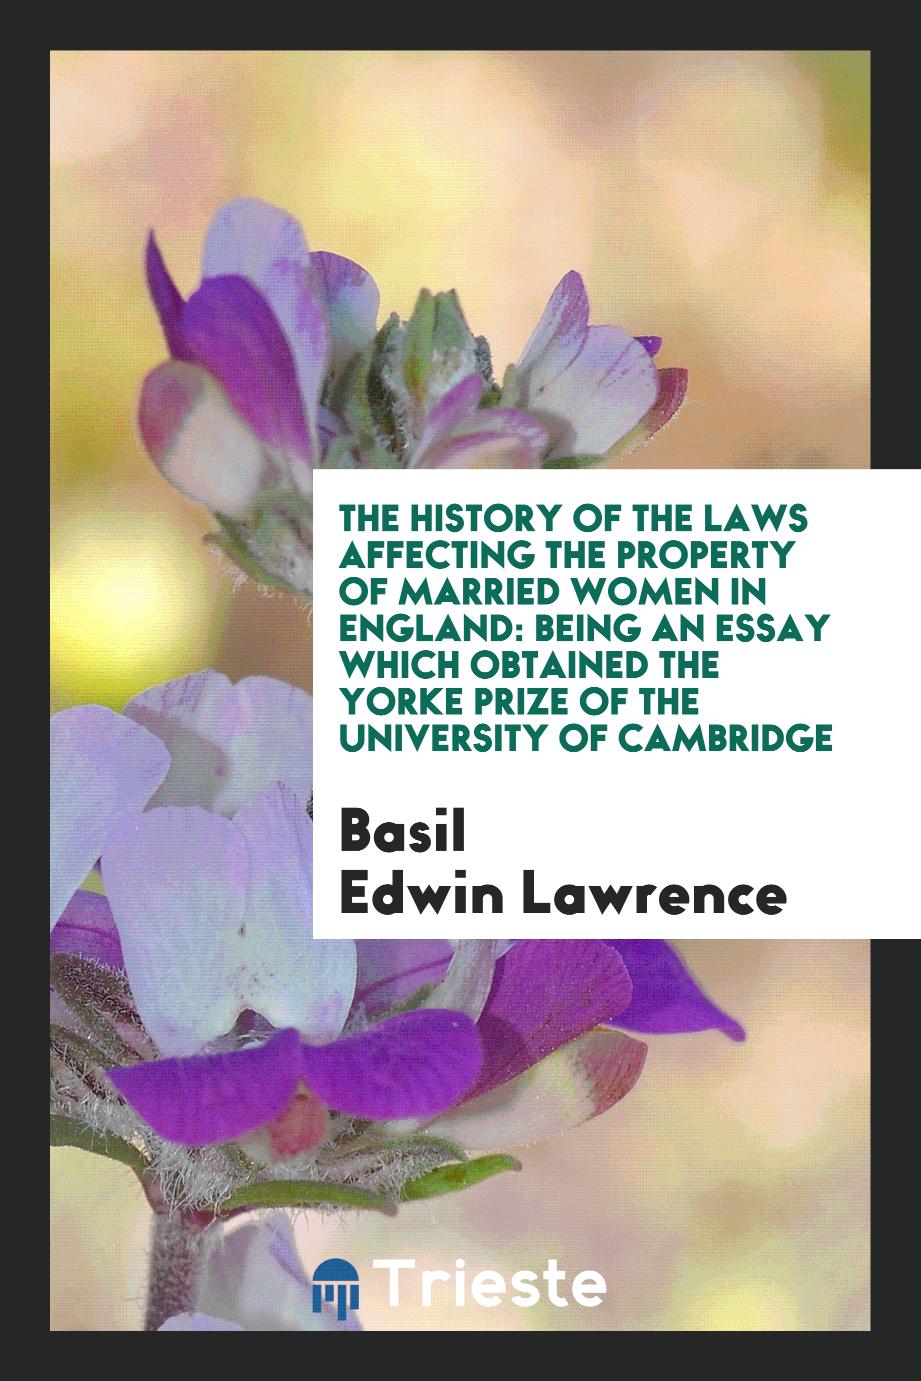 The History of the Laws Affecting the Property of Married Women in England: Being an Essay Which Obtained the Yorke Prize of the University of Cambridge